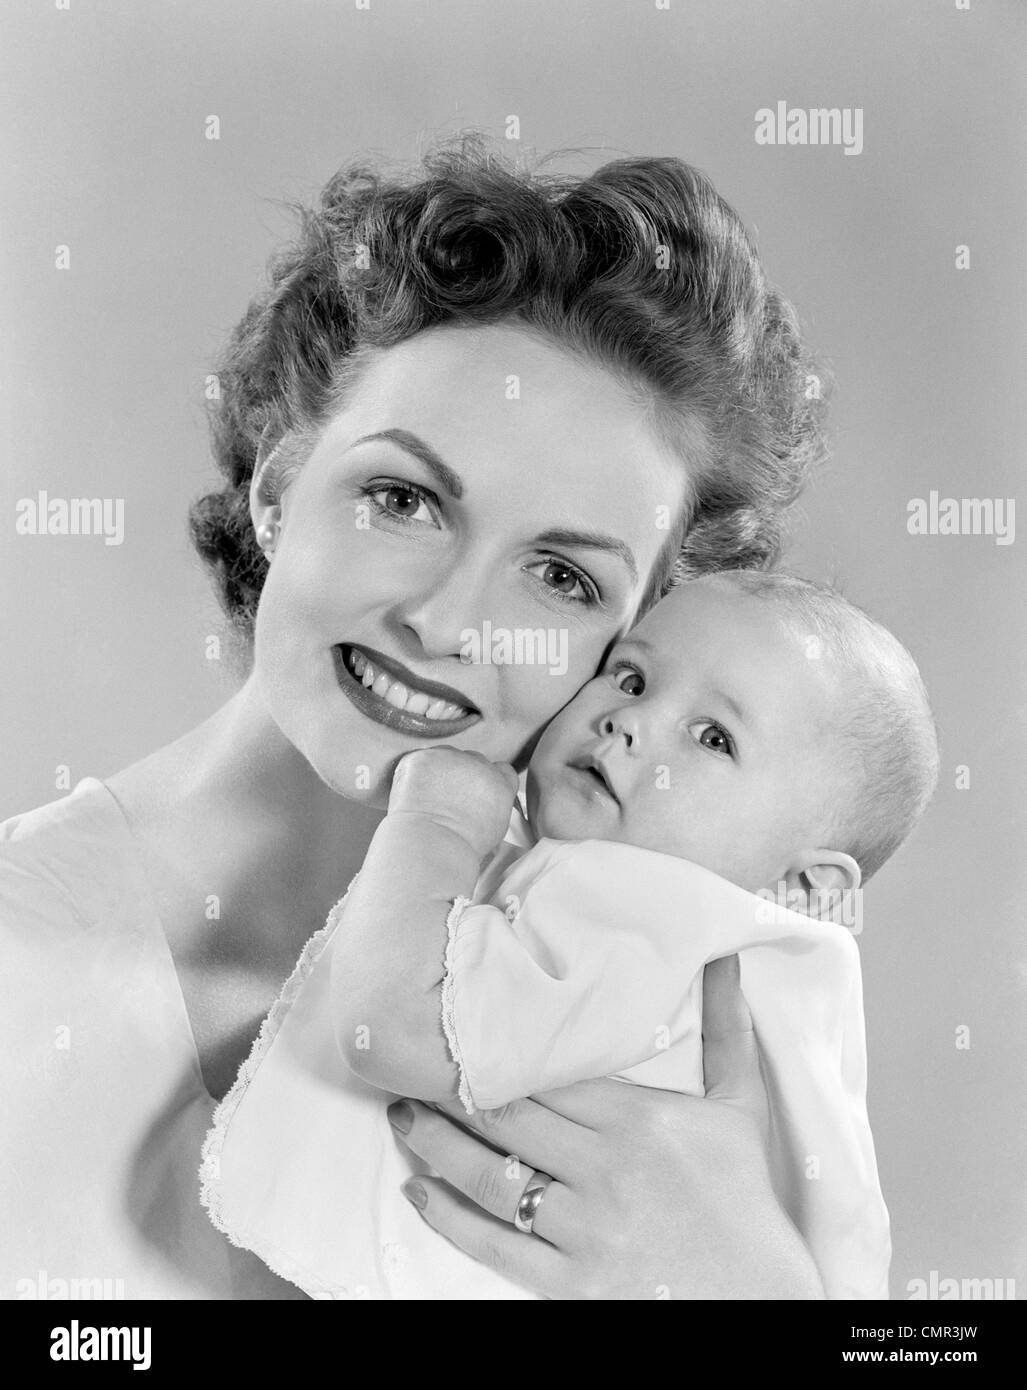 1950s PORTRAIT OF MOTHER HUGGING BABY LOOKING AT CAMERA Stock Photo